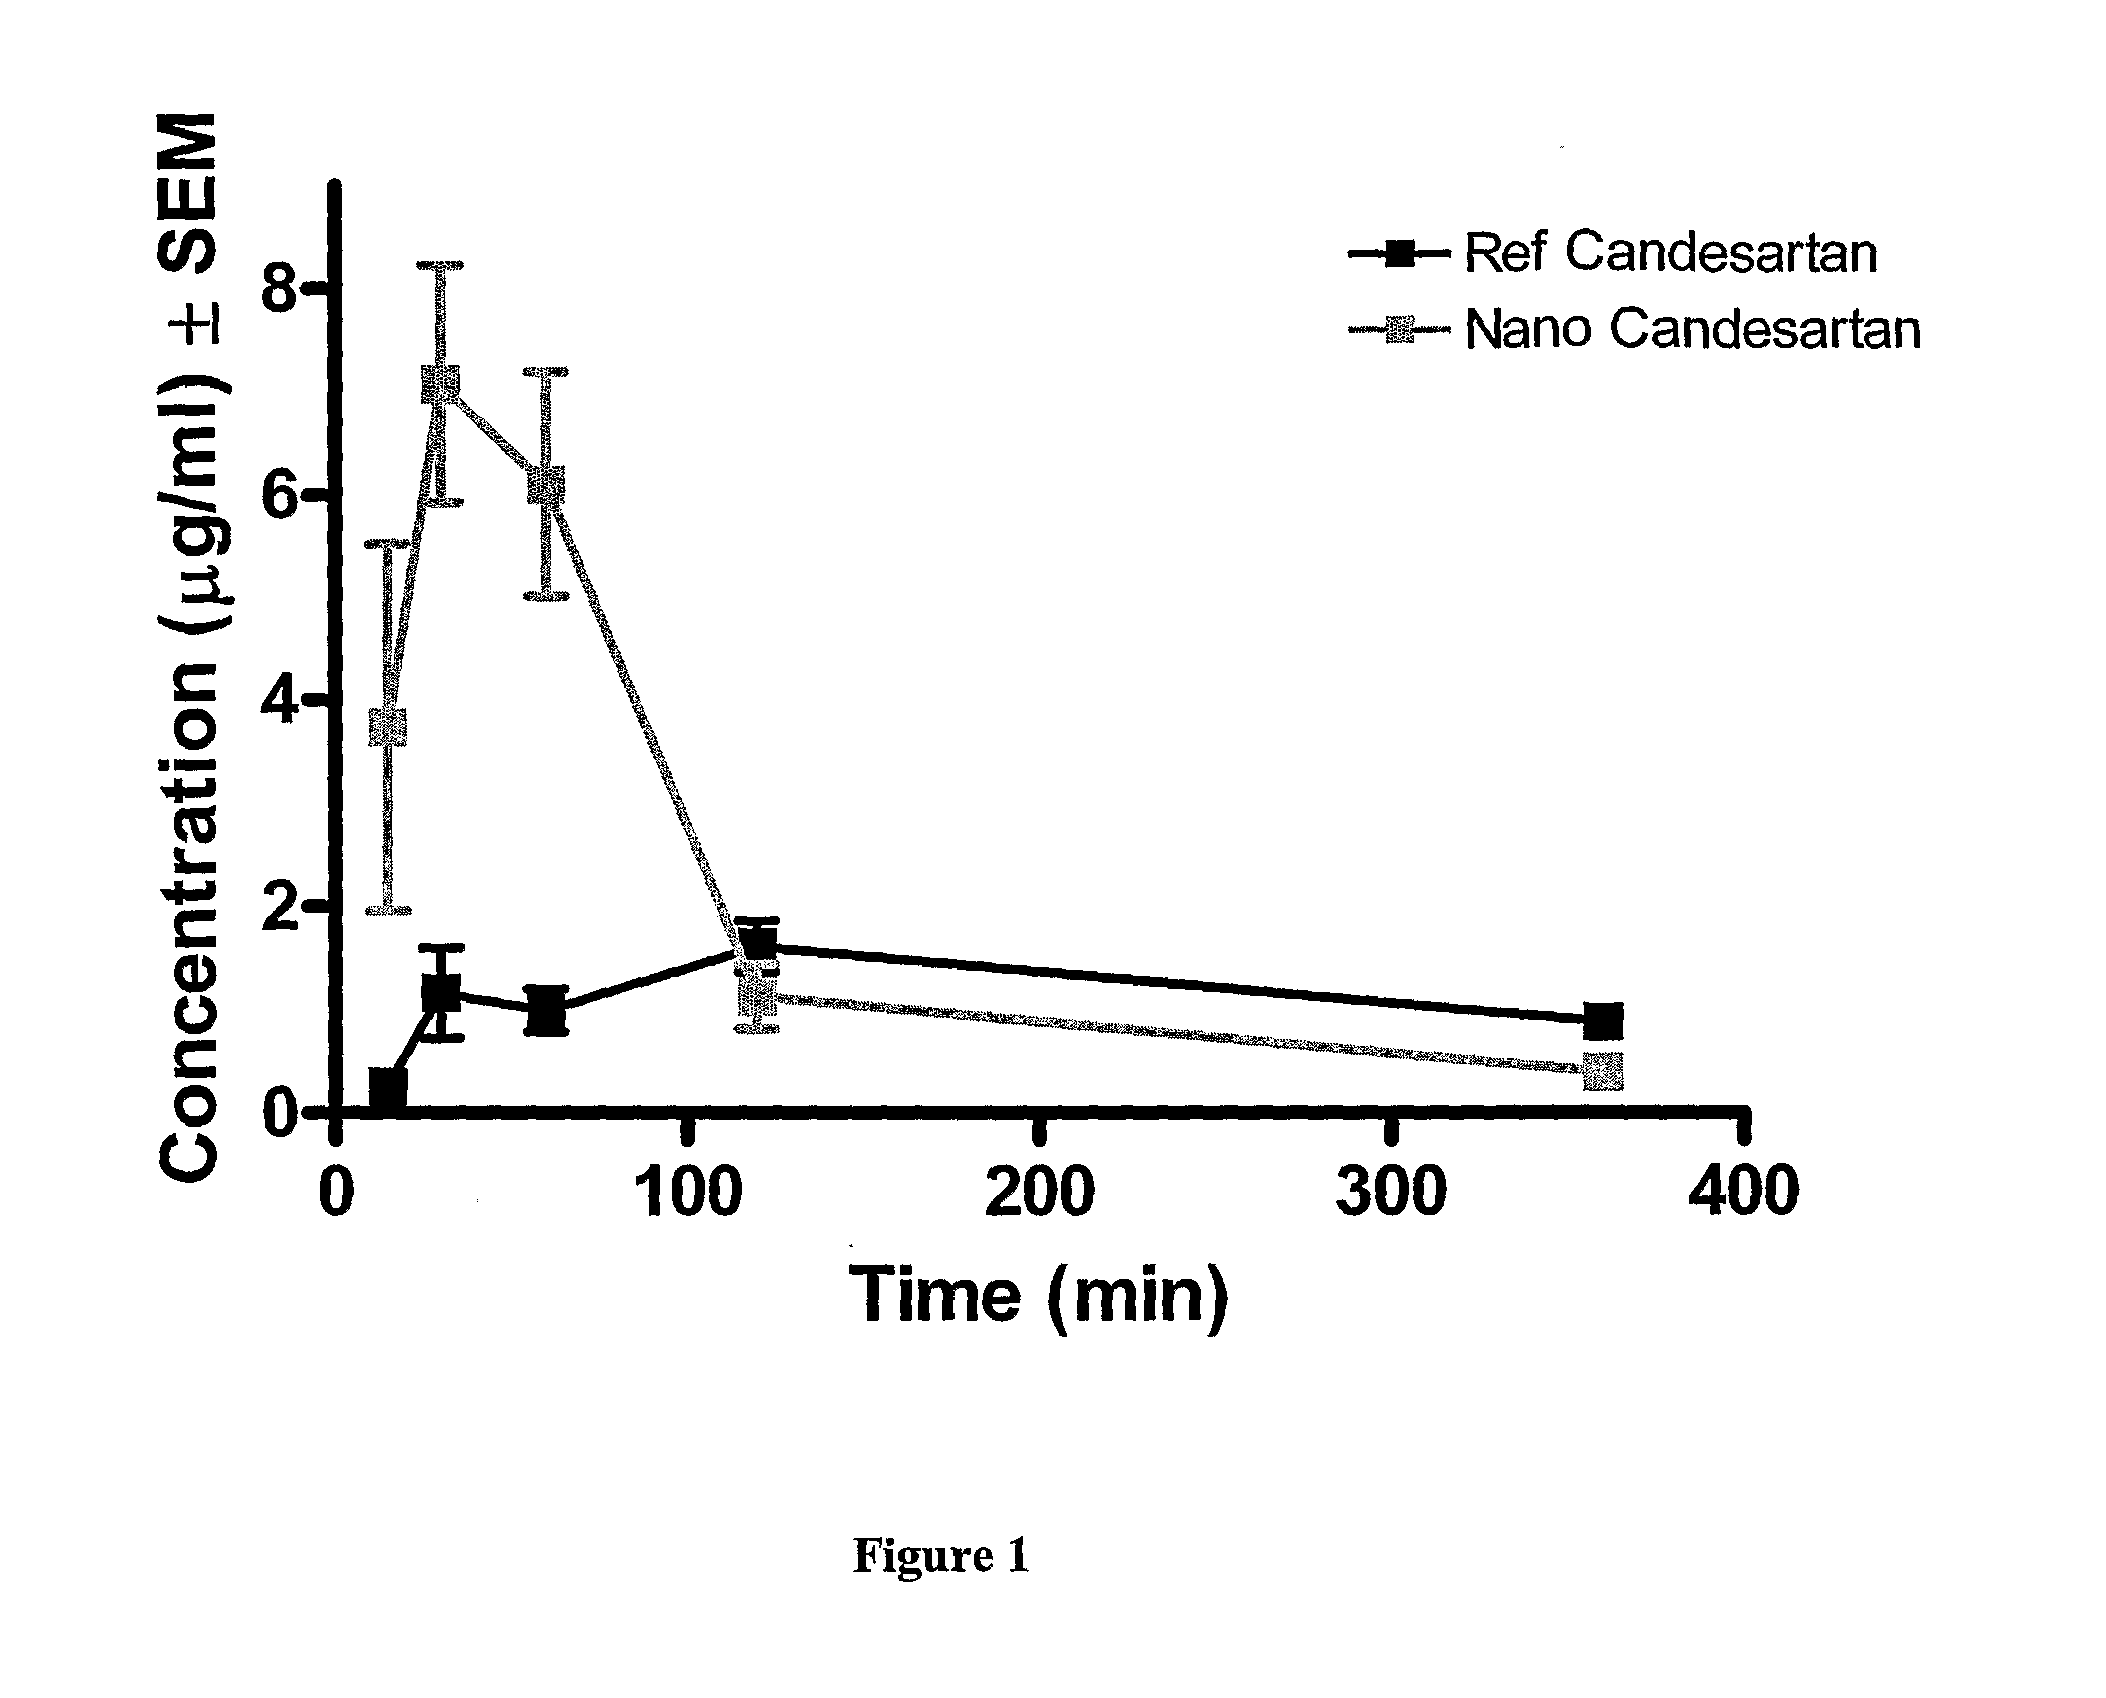 Nanoparticulate candesartan cilexitil compositions, process for the preparation thereof and pharmaceutical compositions containing them